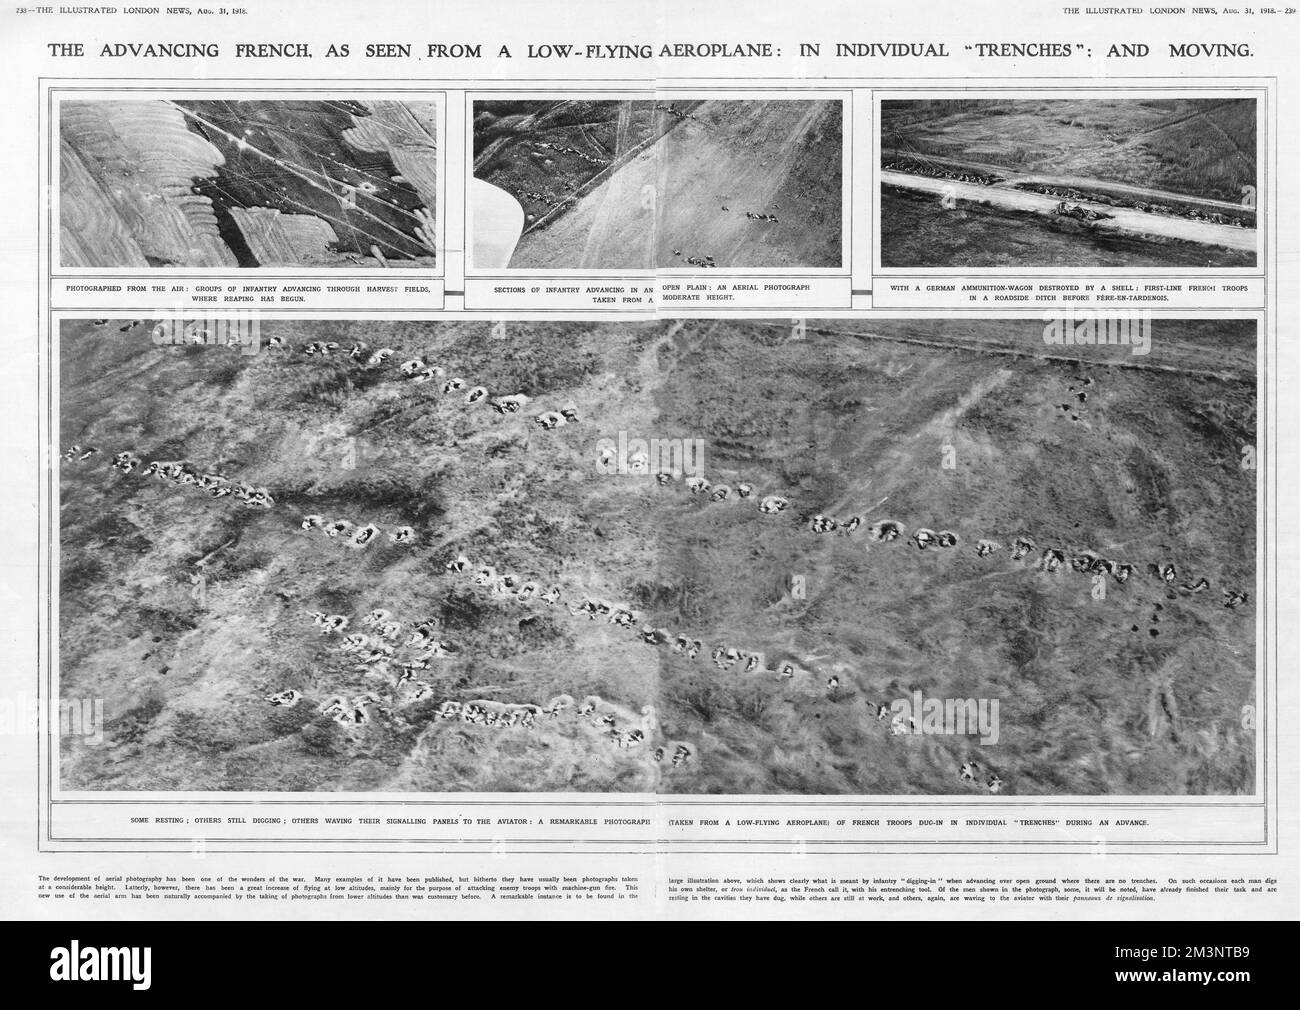 The advancing French as seen from a low-flying aeroplane: in individual trenches and moving. Aerial photographs of French soldiers in World War One on the Western front: infantry advancing through harvest fields; infantry advancing in an open plain; with a German ammunition-wagon destroyed by a shell, first-line French troops in a roadside ditch before Fere-en-Tardenois; and French troops dug-in in individual trenches during an advance - some resting, others still digging, others waving their signalling panels to the aviator (main picture).     Date: 1918 Stock Photo